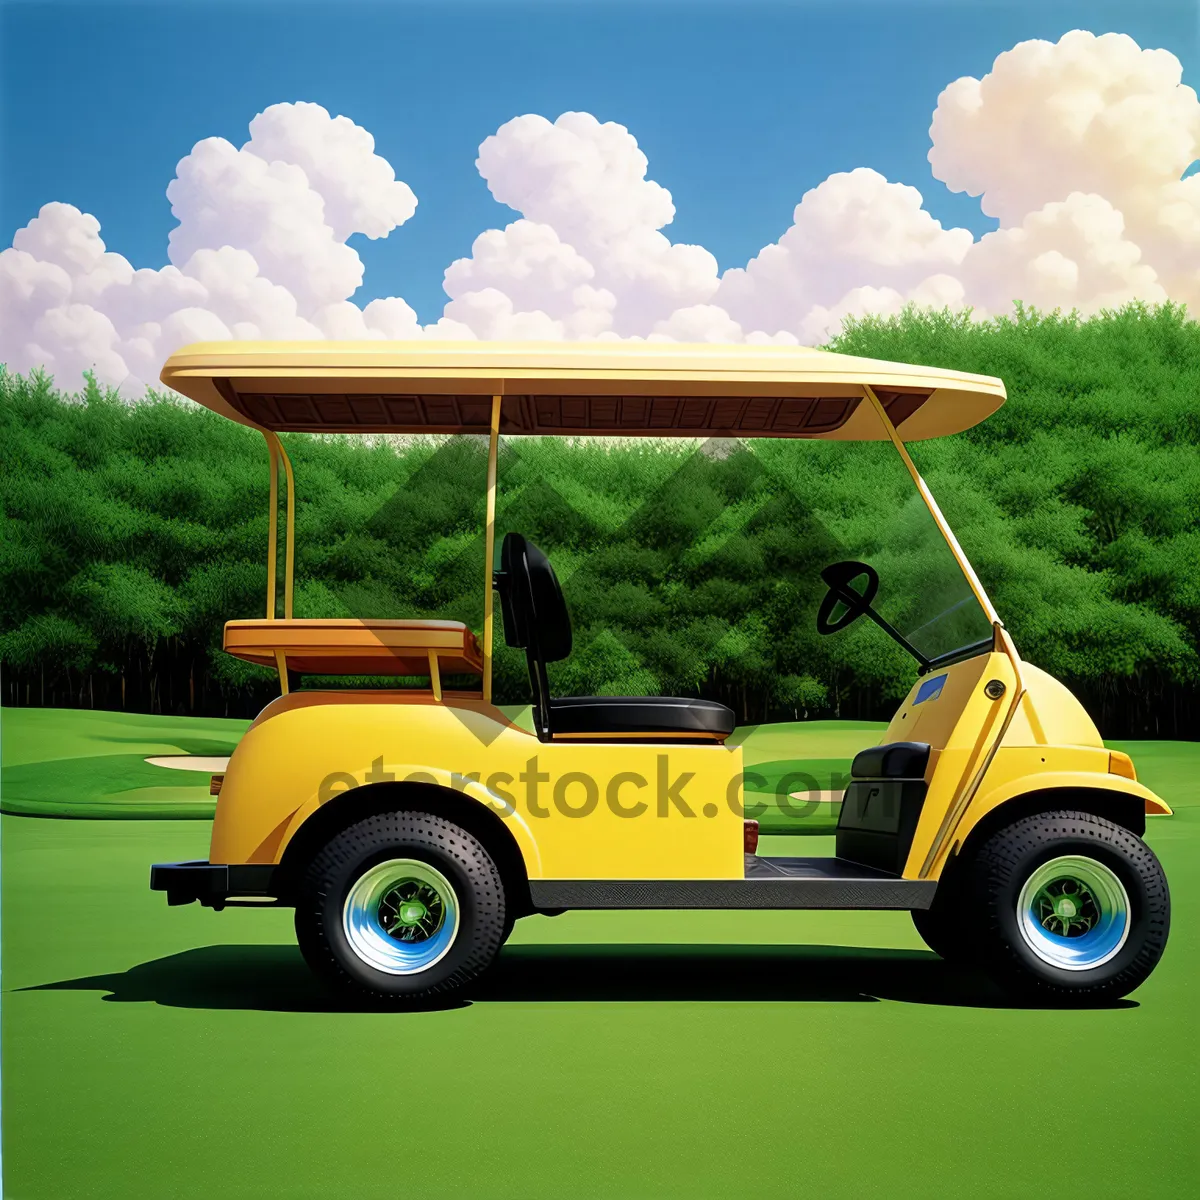 Picture of Golf Cart - Sports Equipment for Motorized Golfing